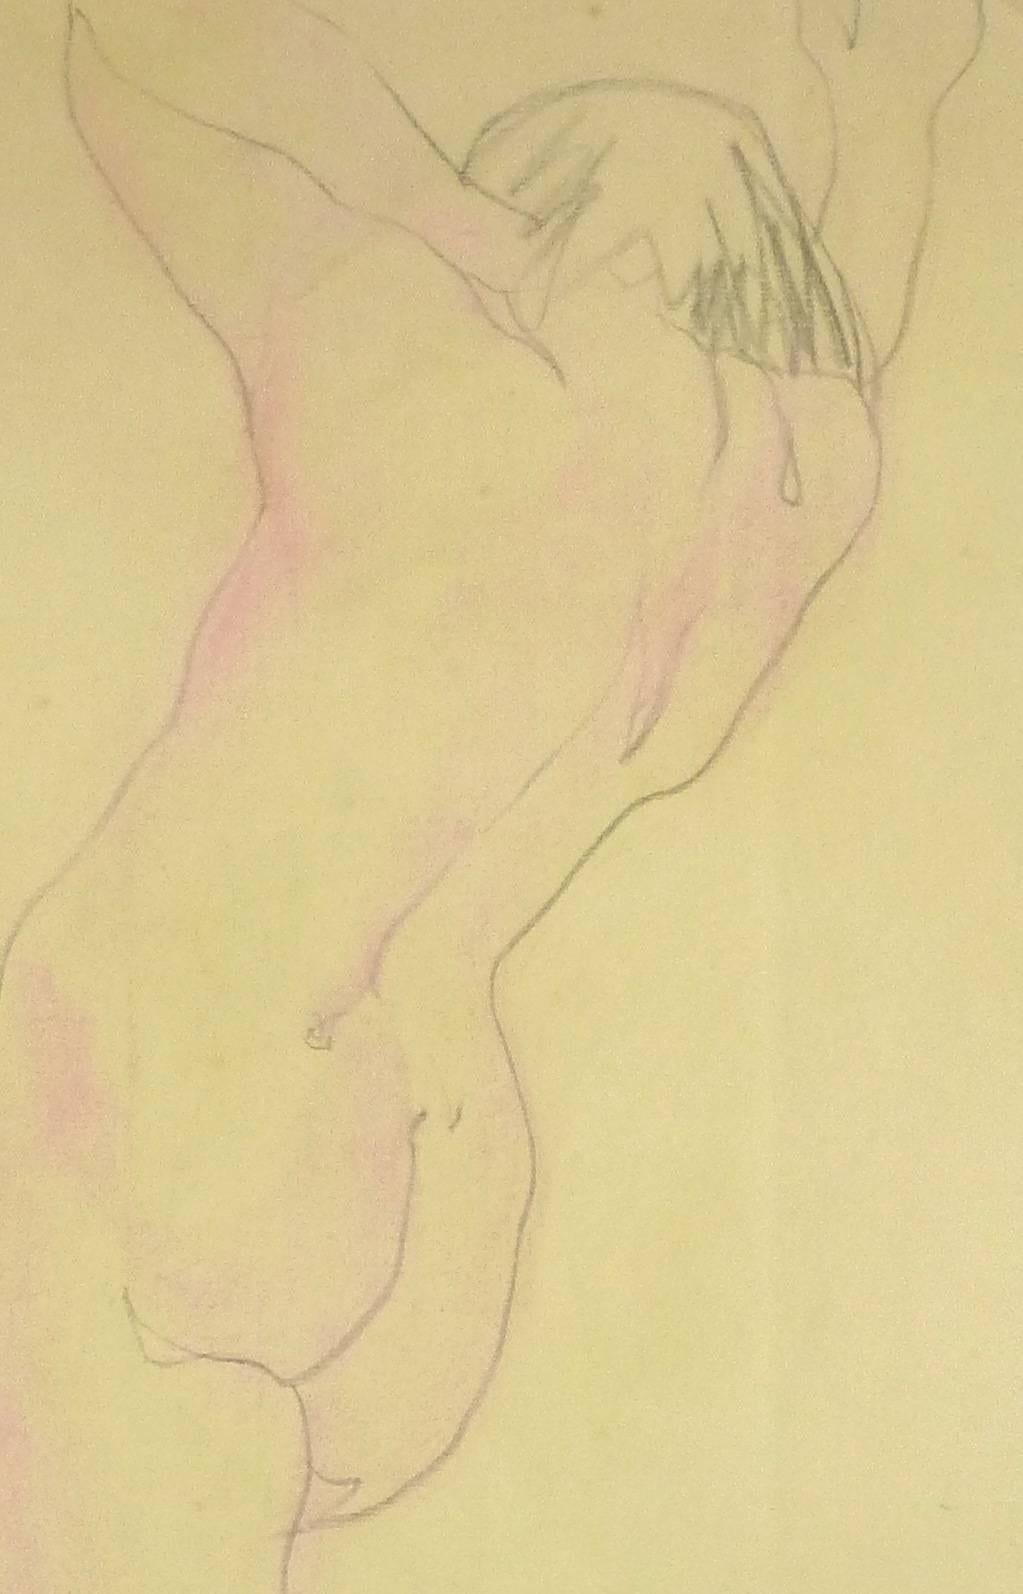 Elegant pencil and pastel nude female in pink, circa 1990.

Original artwork on paper displayed on a white mat with a gold border. Archival plastic sleeve and Certificate of Authenticity included. Artwork, 13"L x 21.75"H; mat, 24"L x